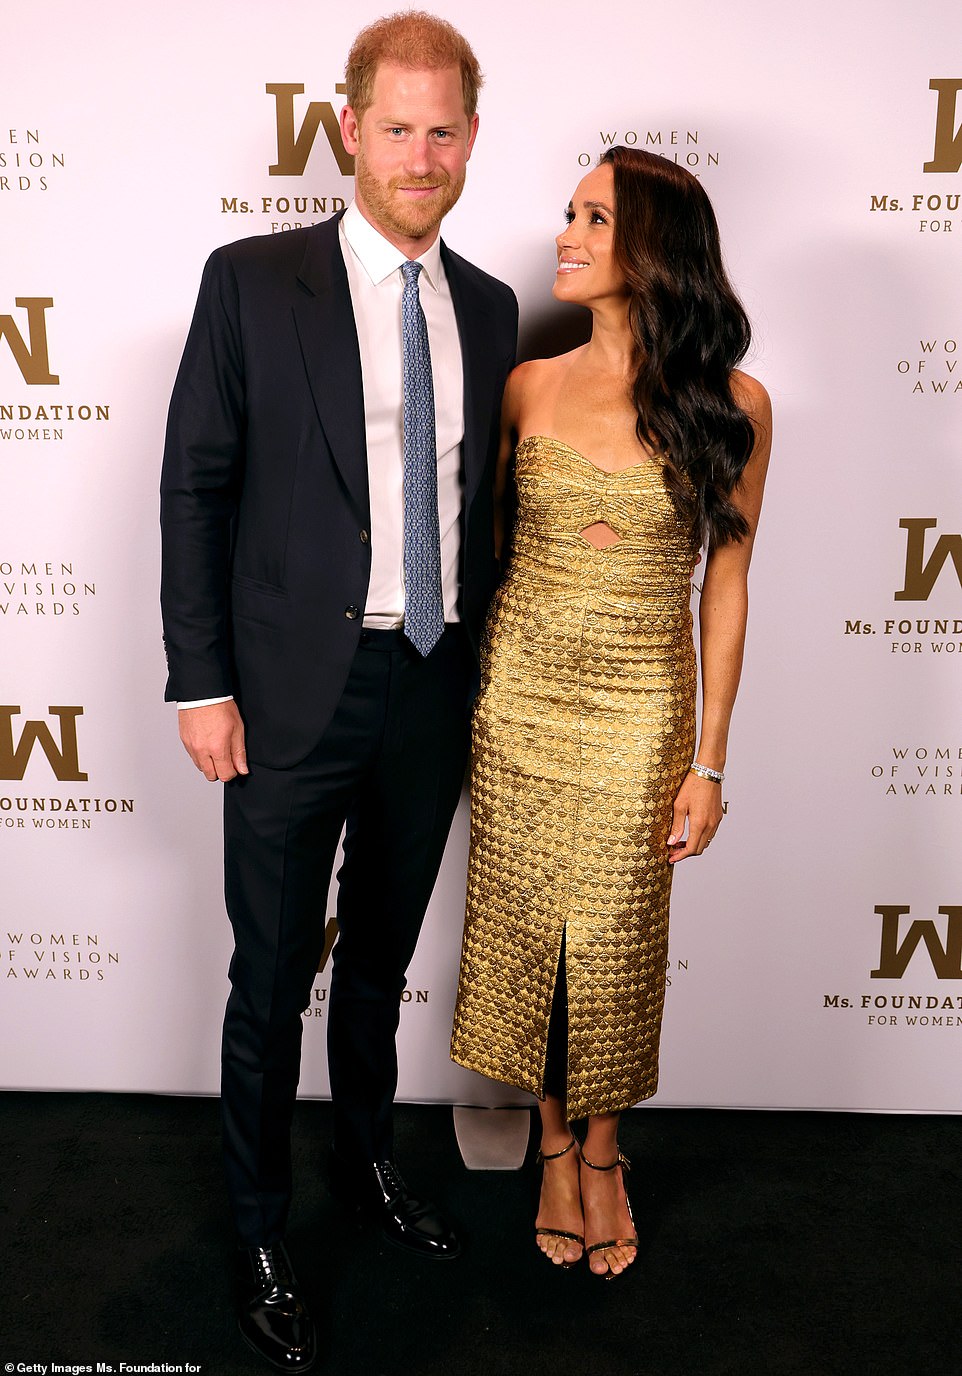 The Duchess of Sussex was joined at the event by her husband Prince Harry - and the couple posed for a few photos on the red carpet, although they opted to wait until the carpet's livestream had ended before stepping in front of the cameras